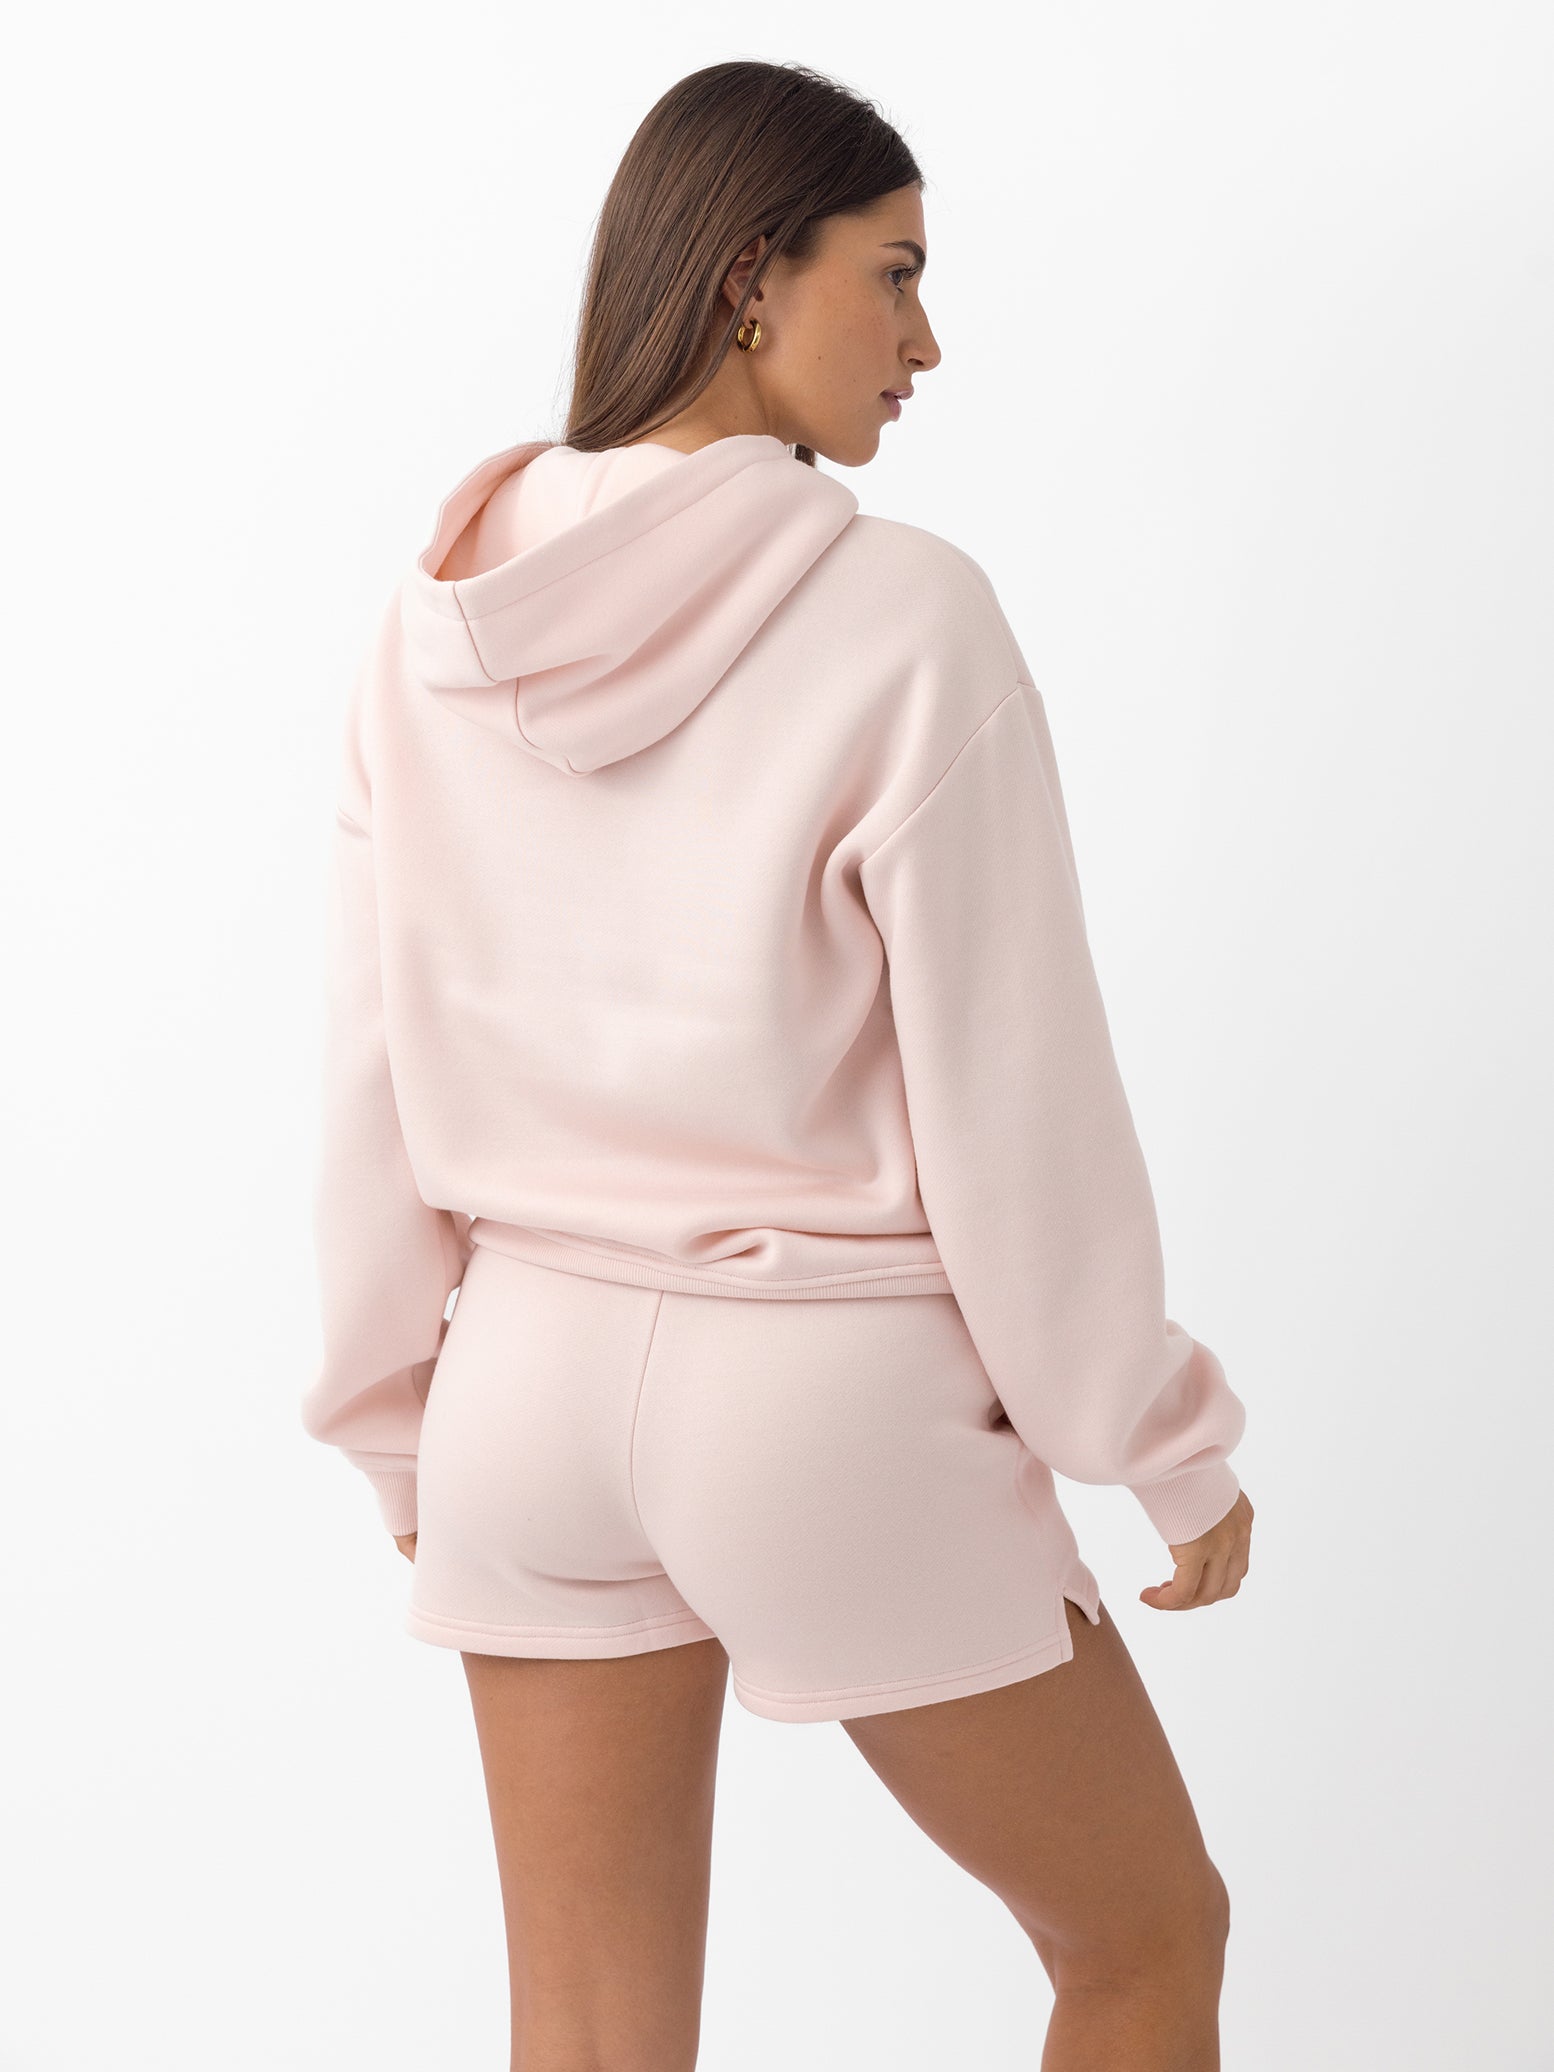 Back of woman wearing peony cityscape hoodie and shorts with white background 